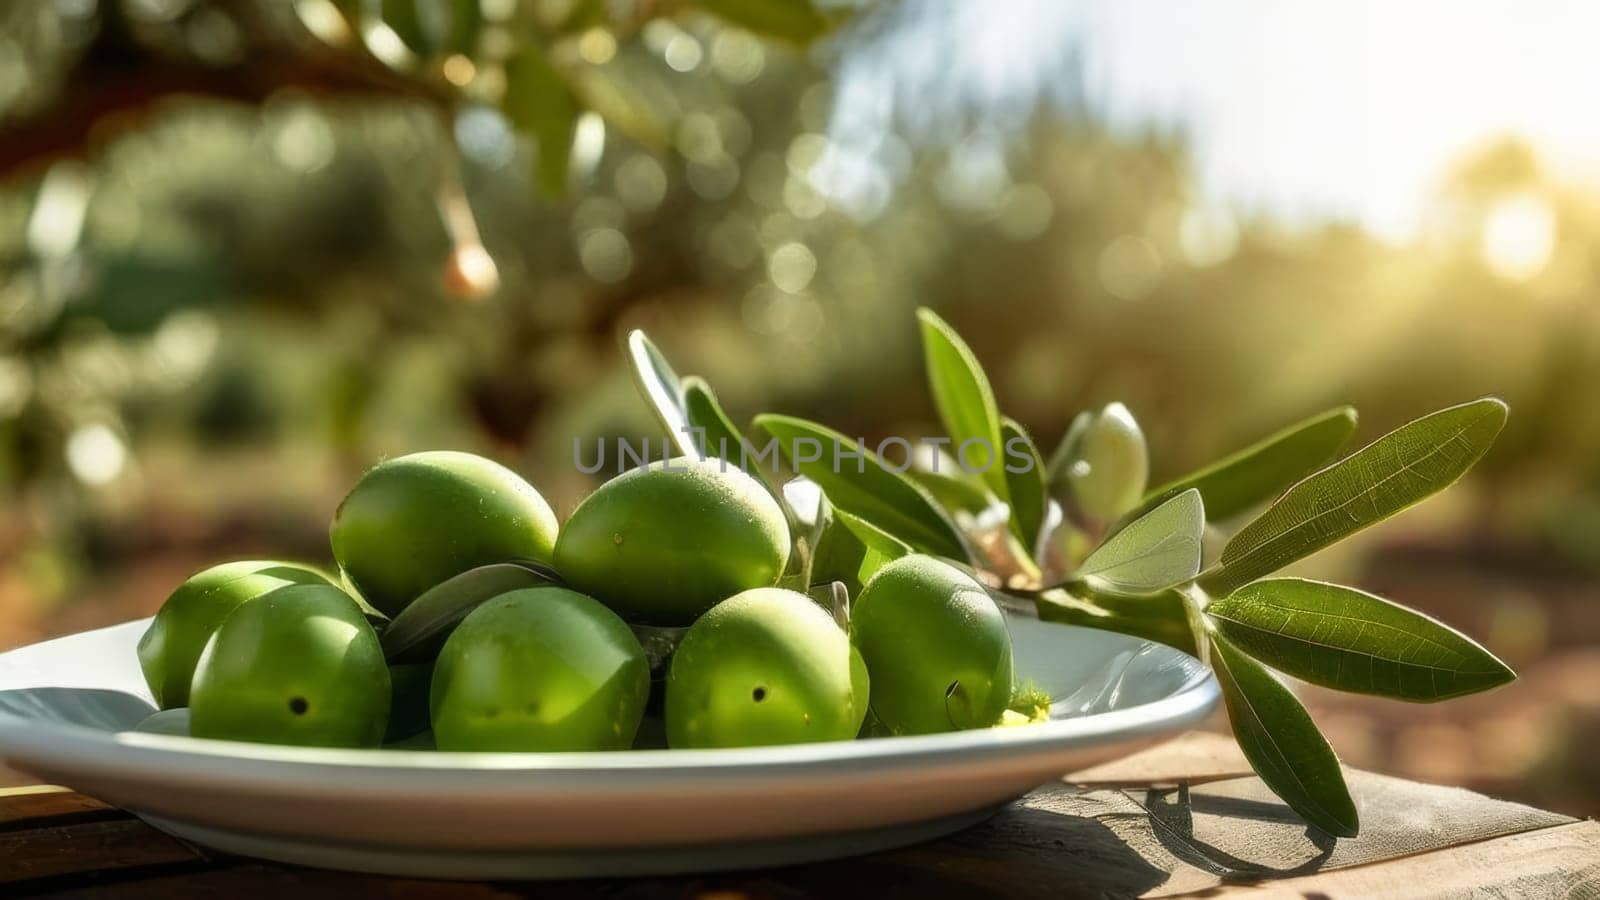 Whole fresh green olives on plate in beautiful sunlight outdoors. Green olives with leaves on wooden table. Natural food ingredient commonly used in dishes and salads